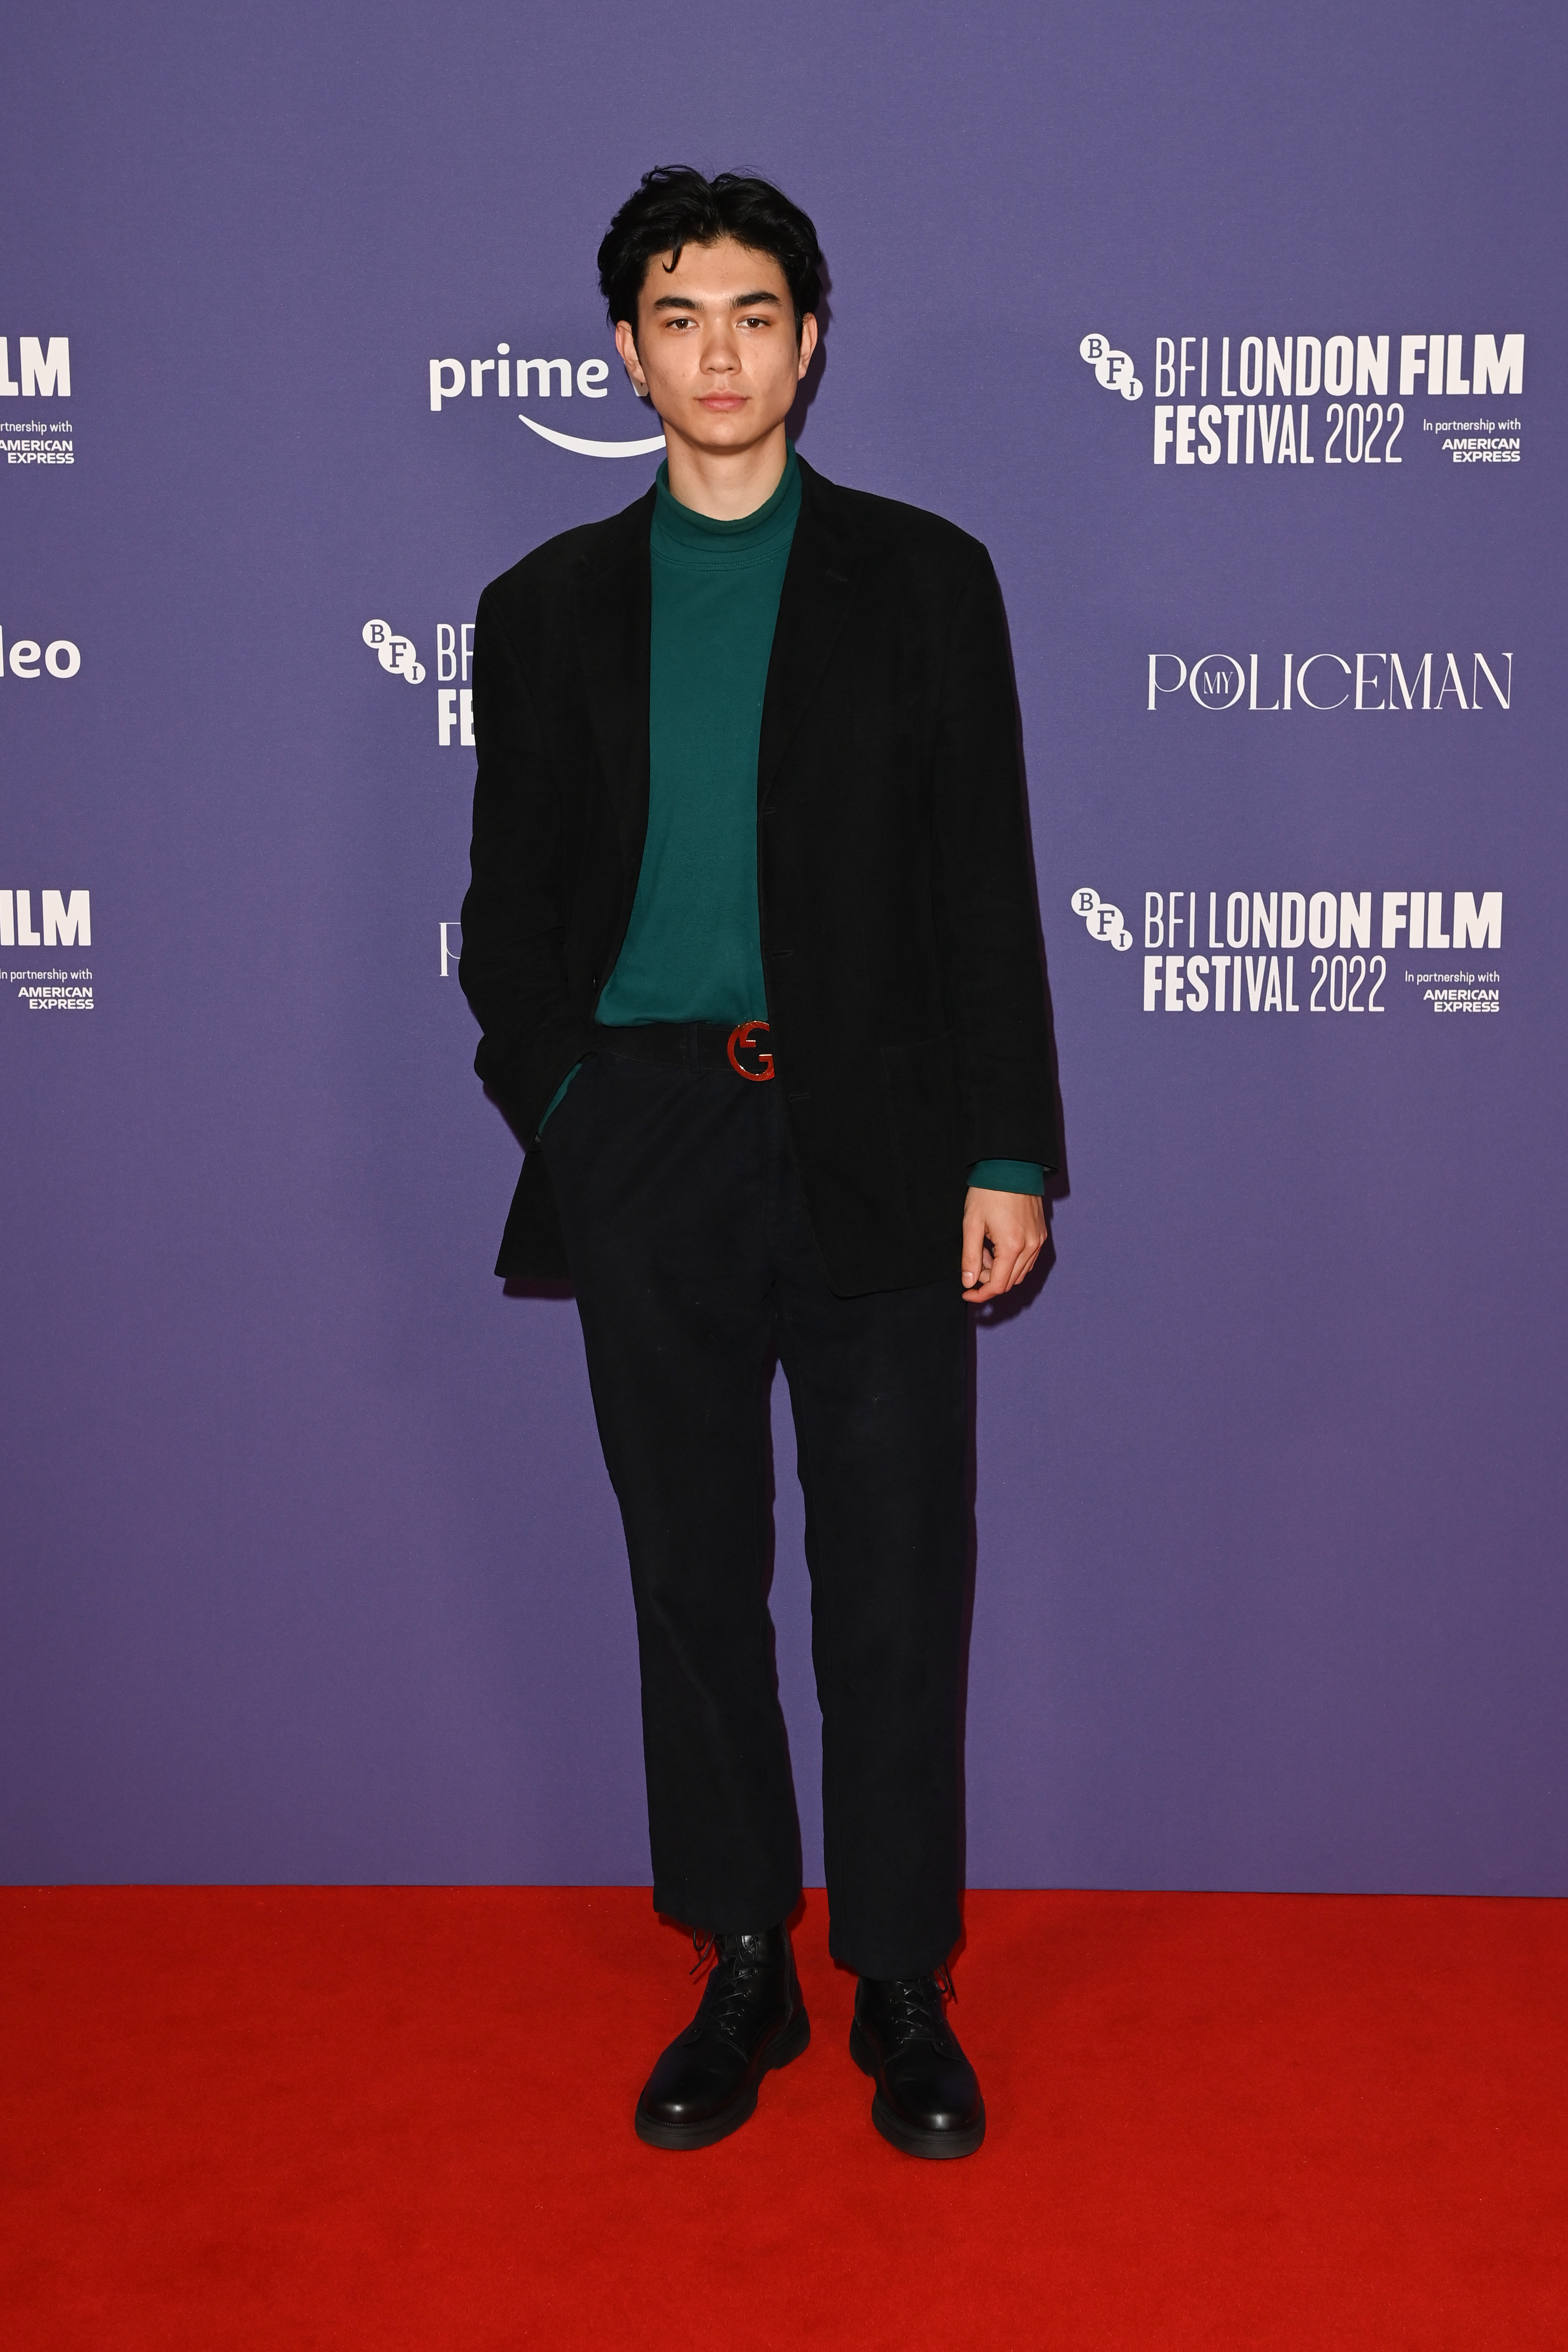 William Gao attends the European Premiere of "My Policeman" during the 66th BFI London Film Festival at The Royal Festival Hall on October 15, 2022, in London, England. | Source: Getty Images